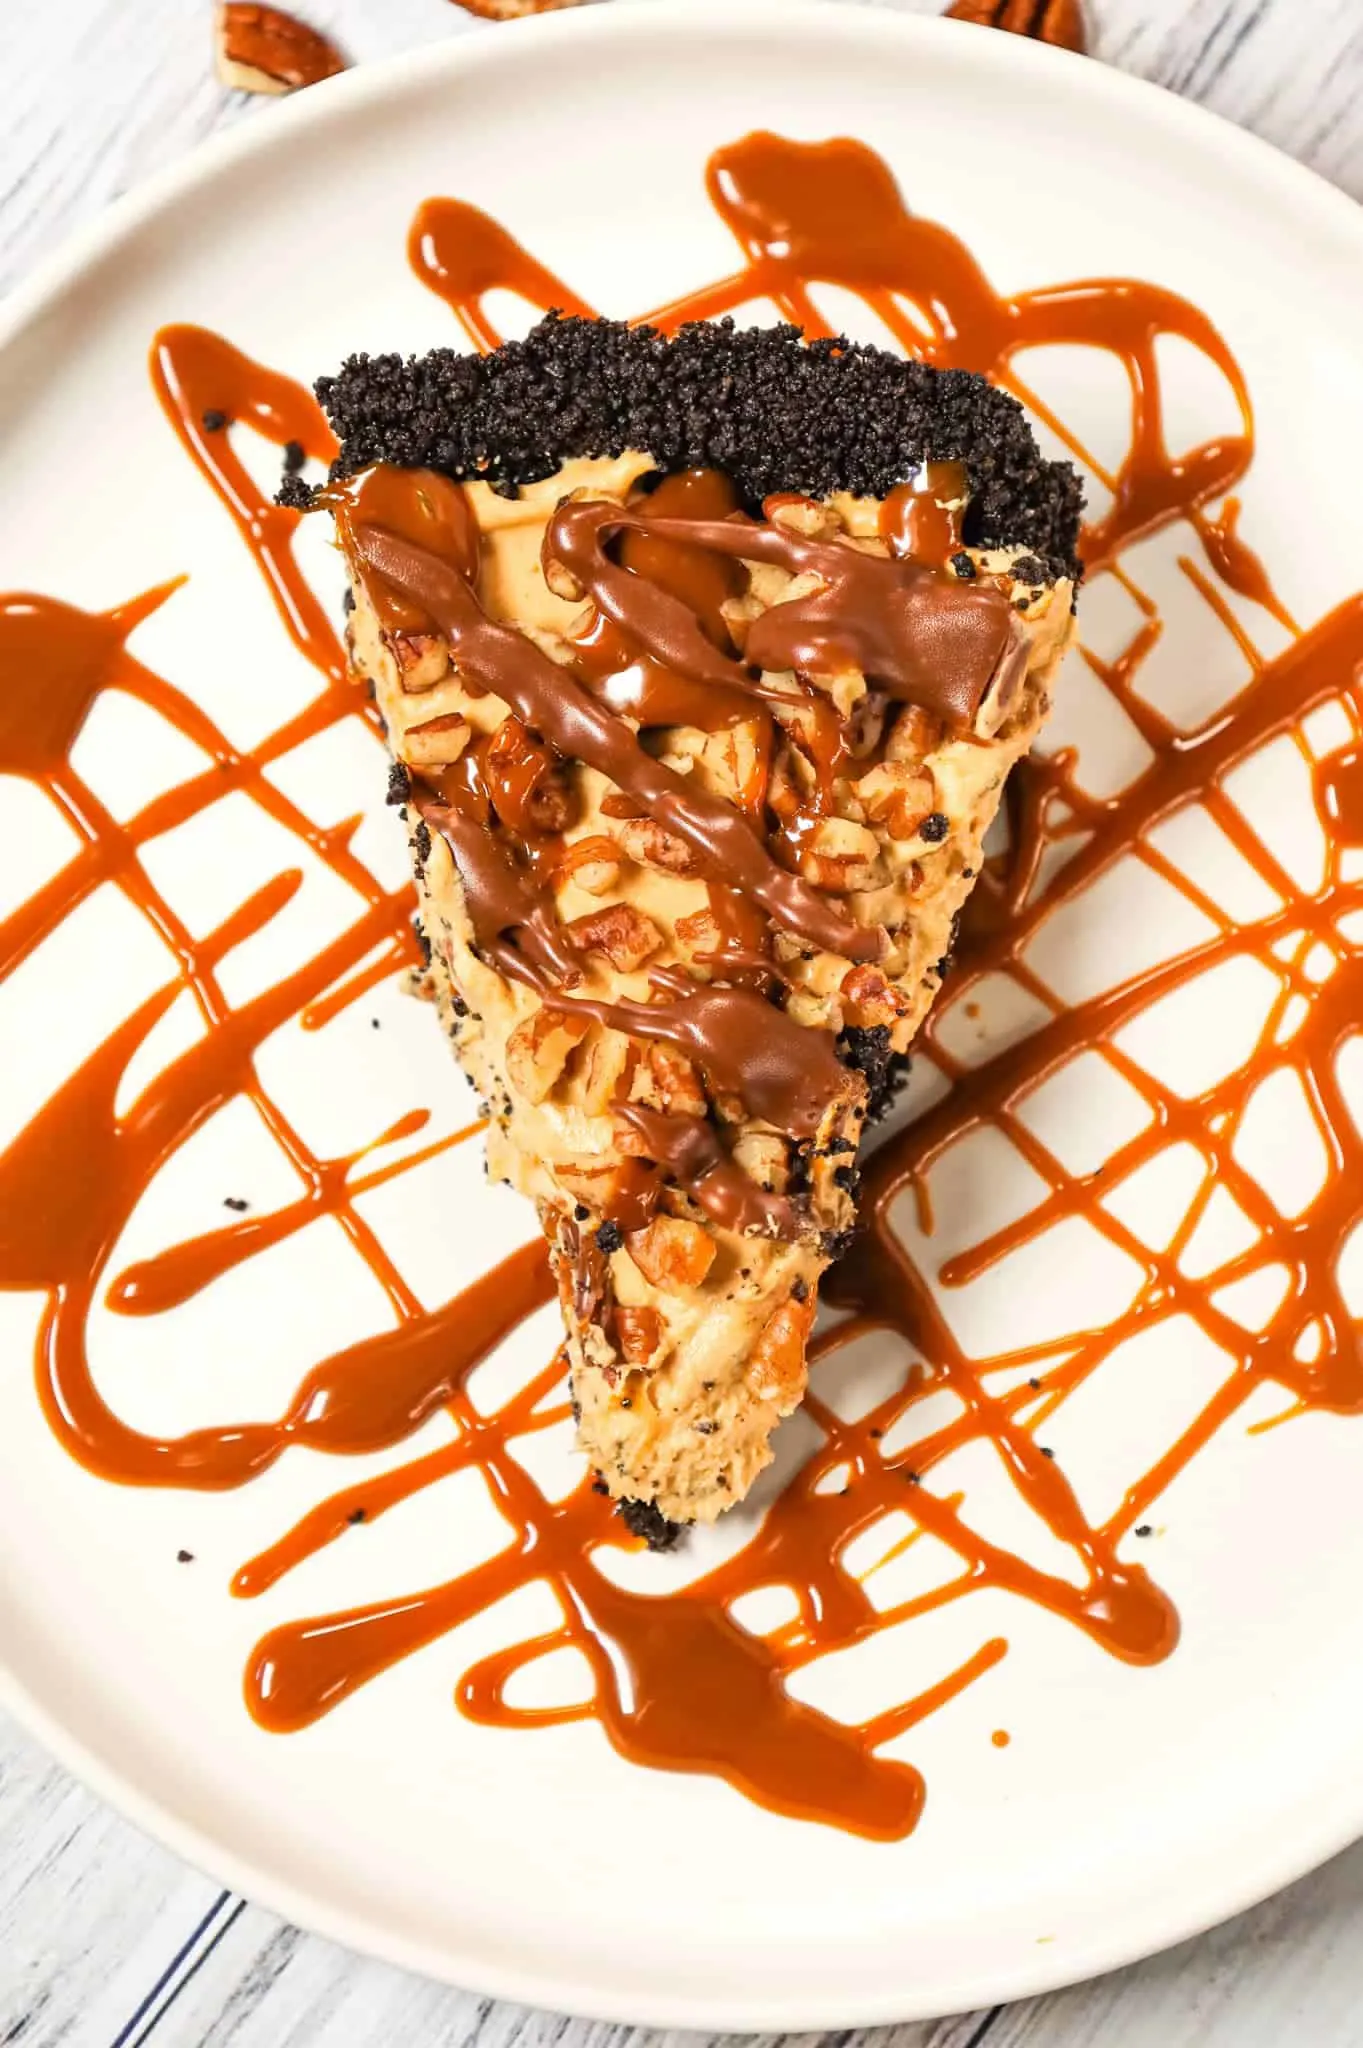 Turtle Pie is a delicious no bake cheesecake pie in an Oreo crust and loaded with caramel sauce, milk chocolate and chopped pecans.